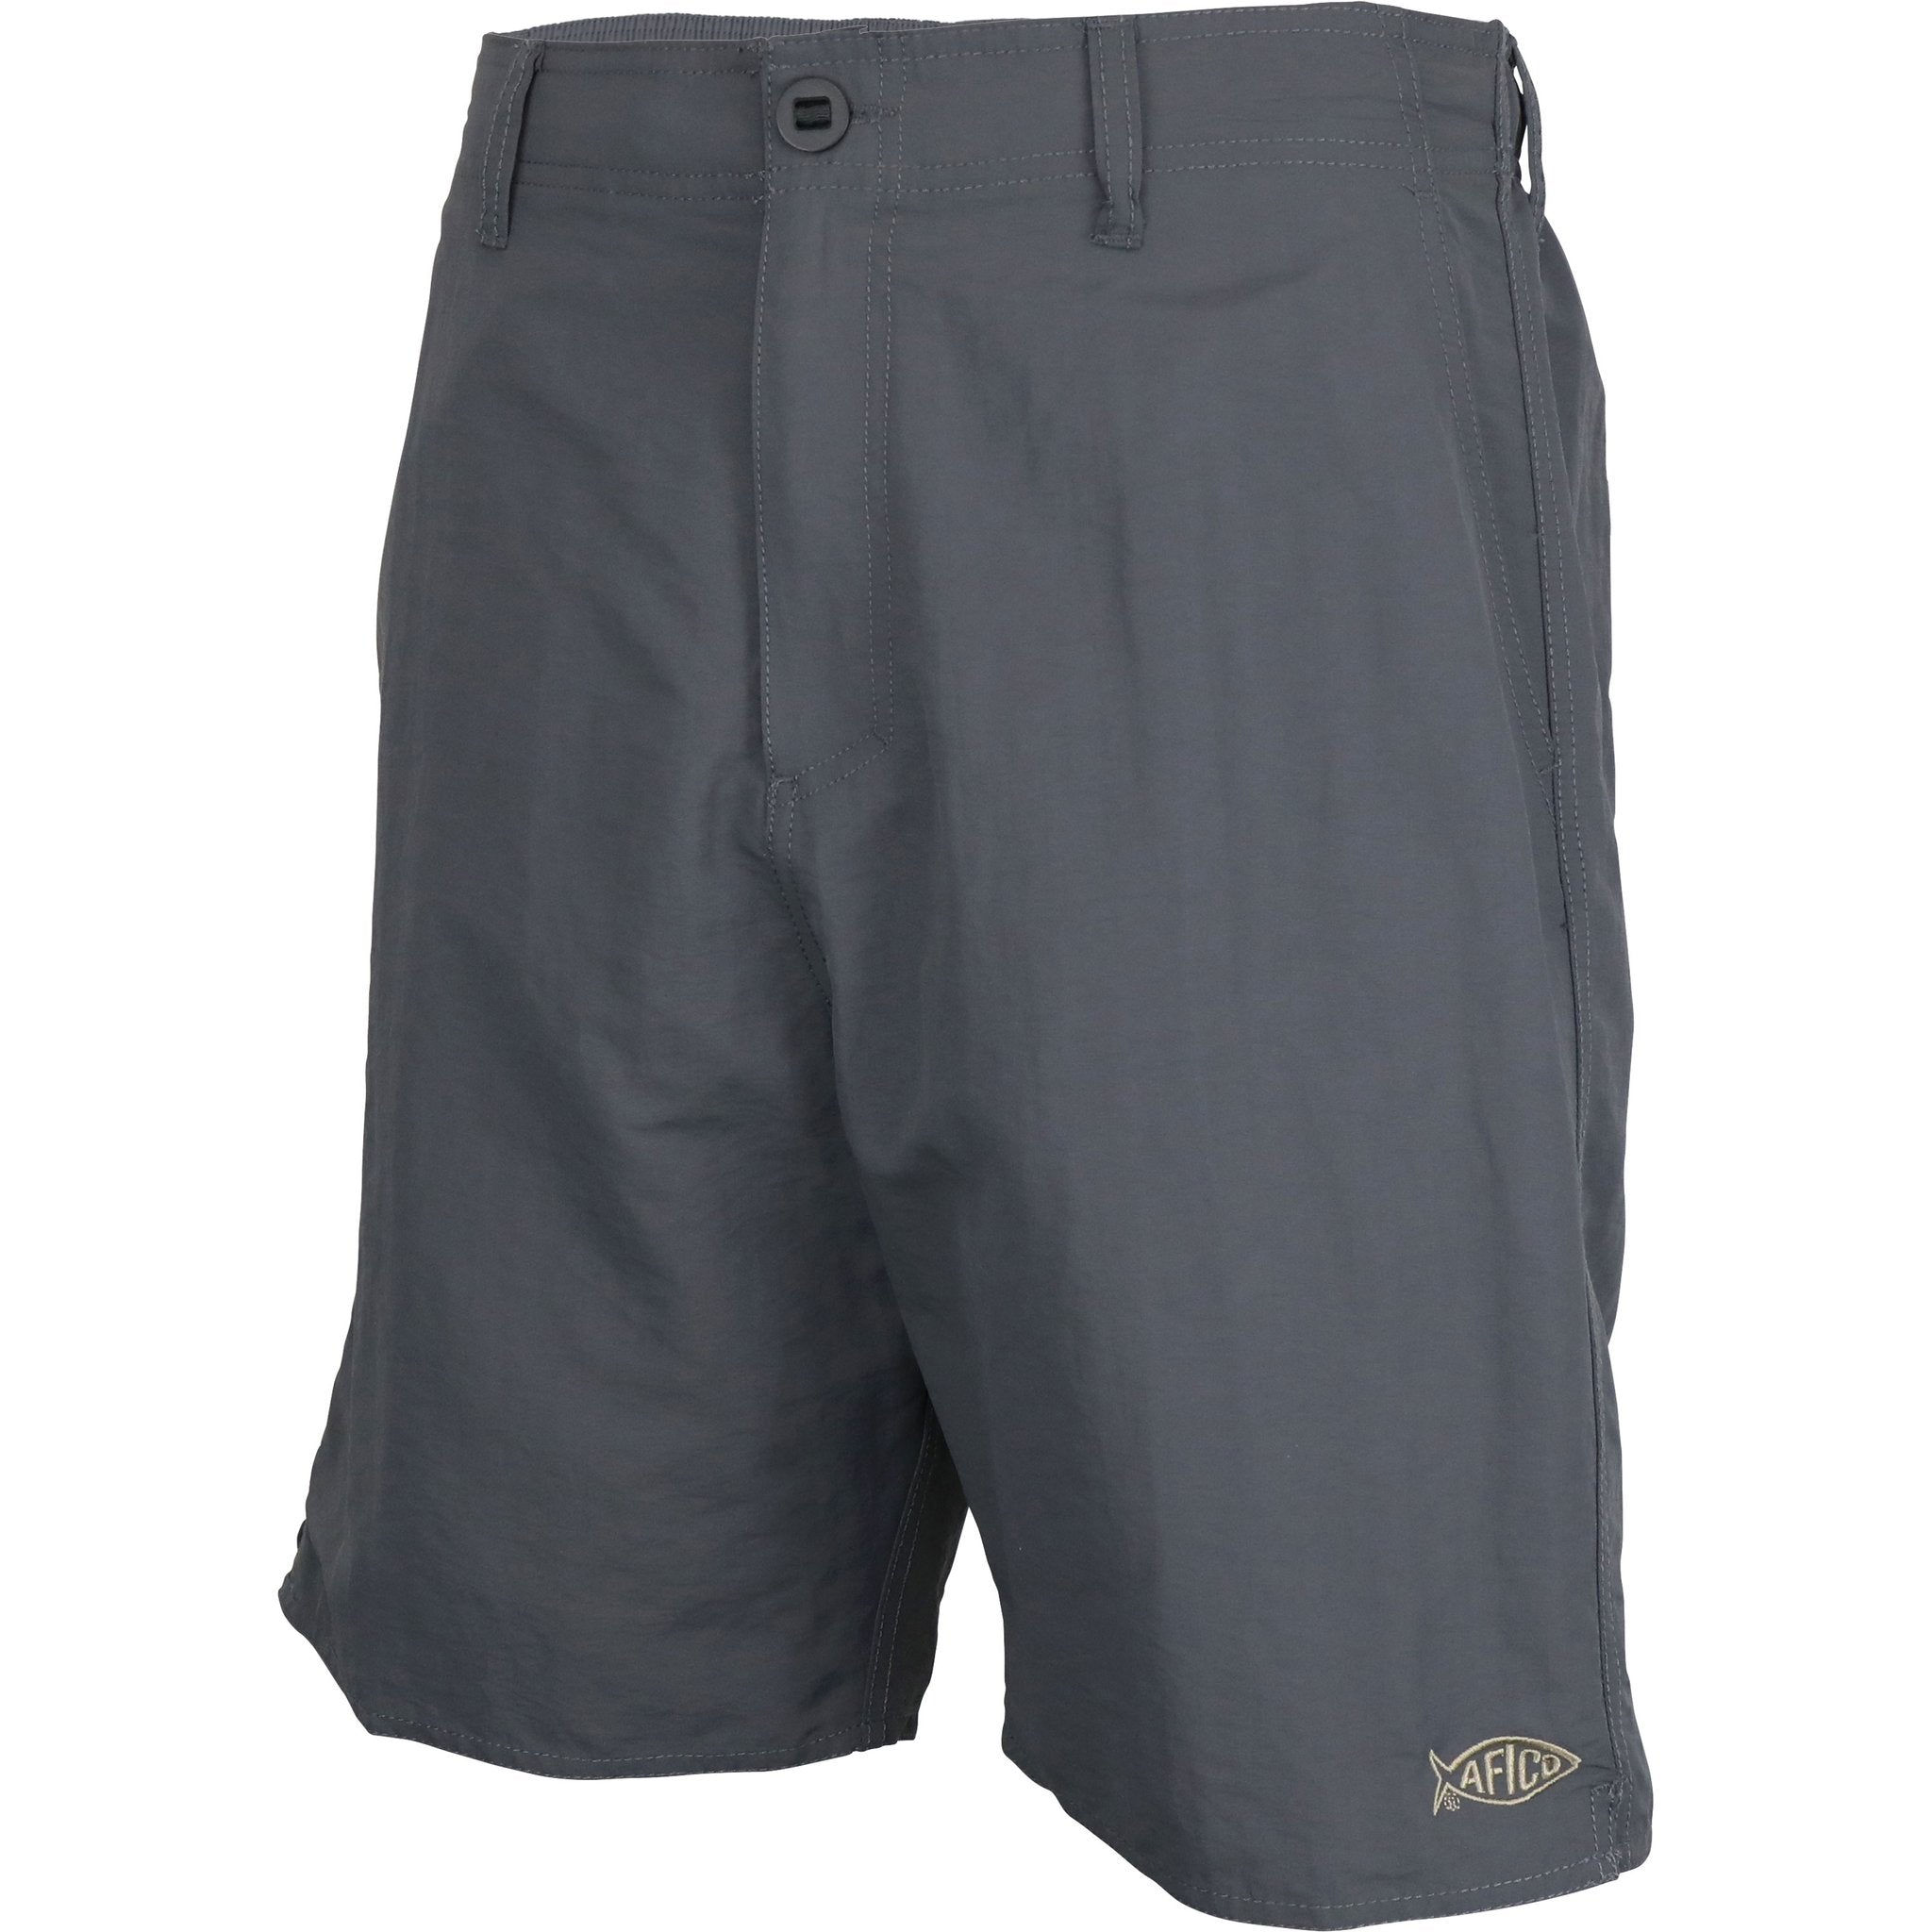 AFTCO Everyday Fishing Shorts - Charcoal - 40